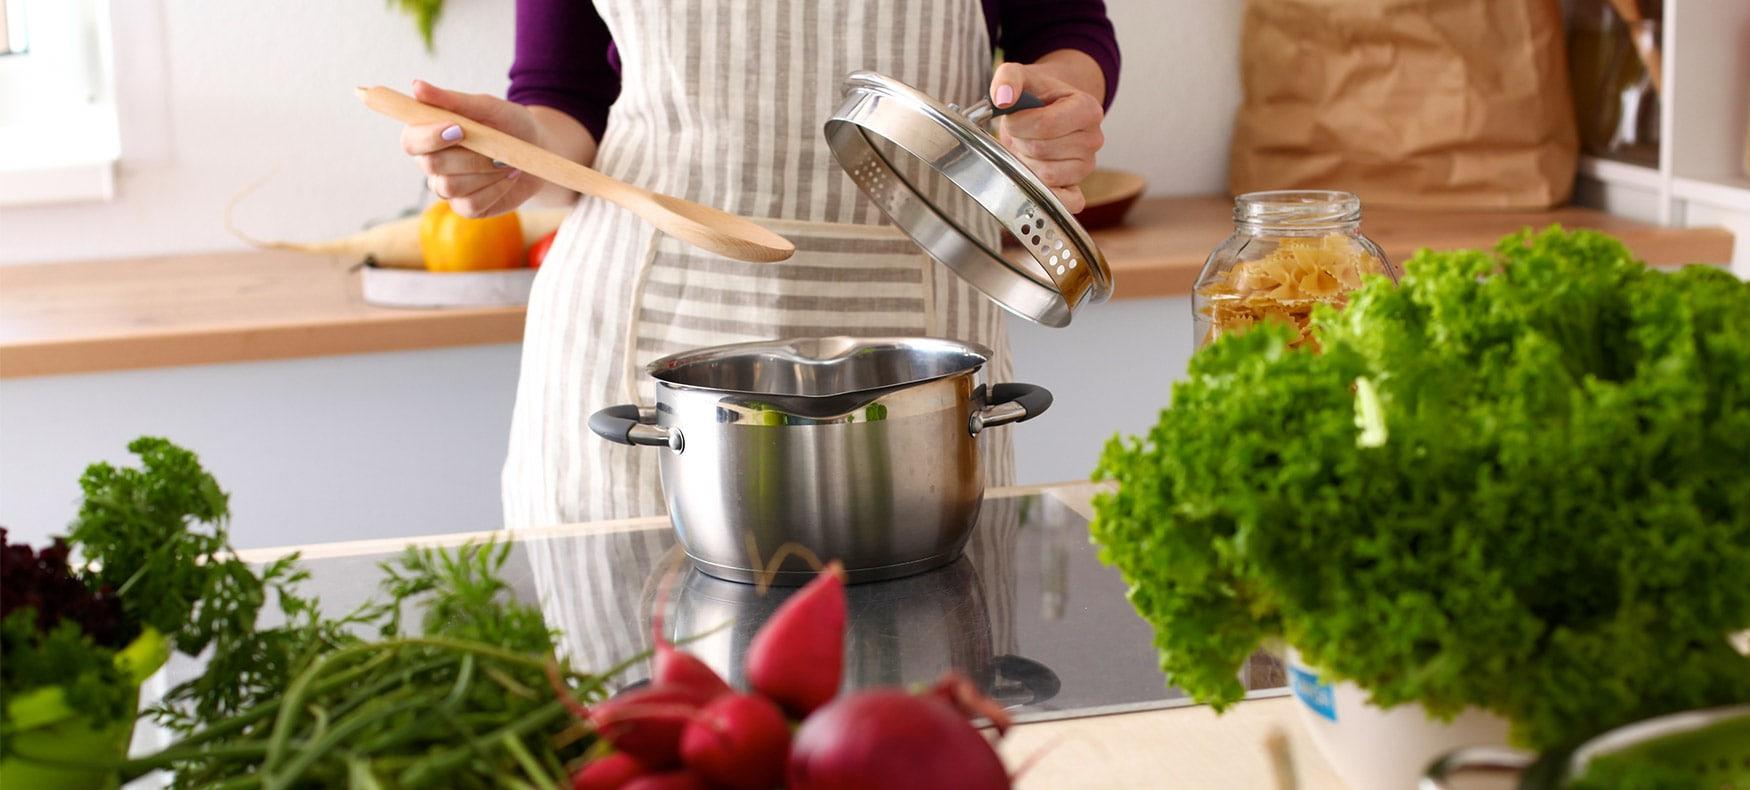 woman cooking with fresh ingredients in kitchen